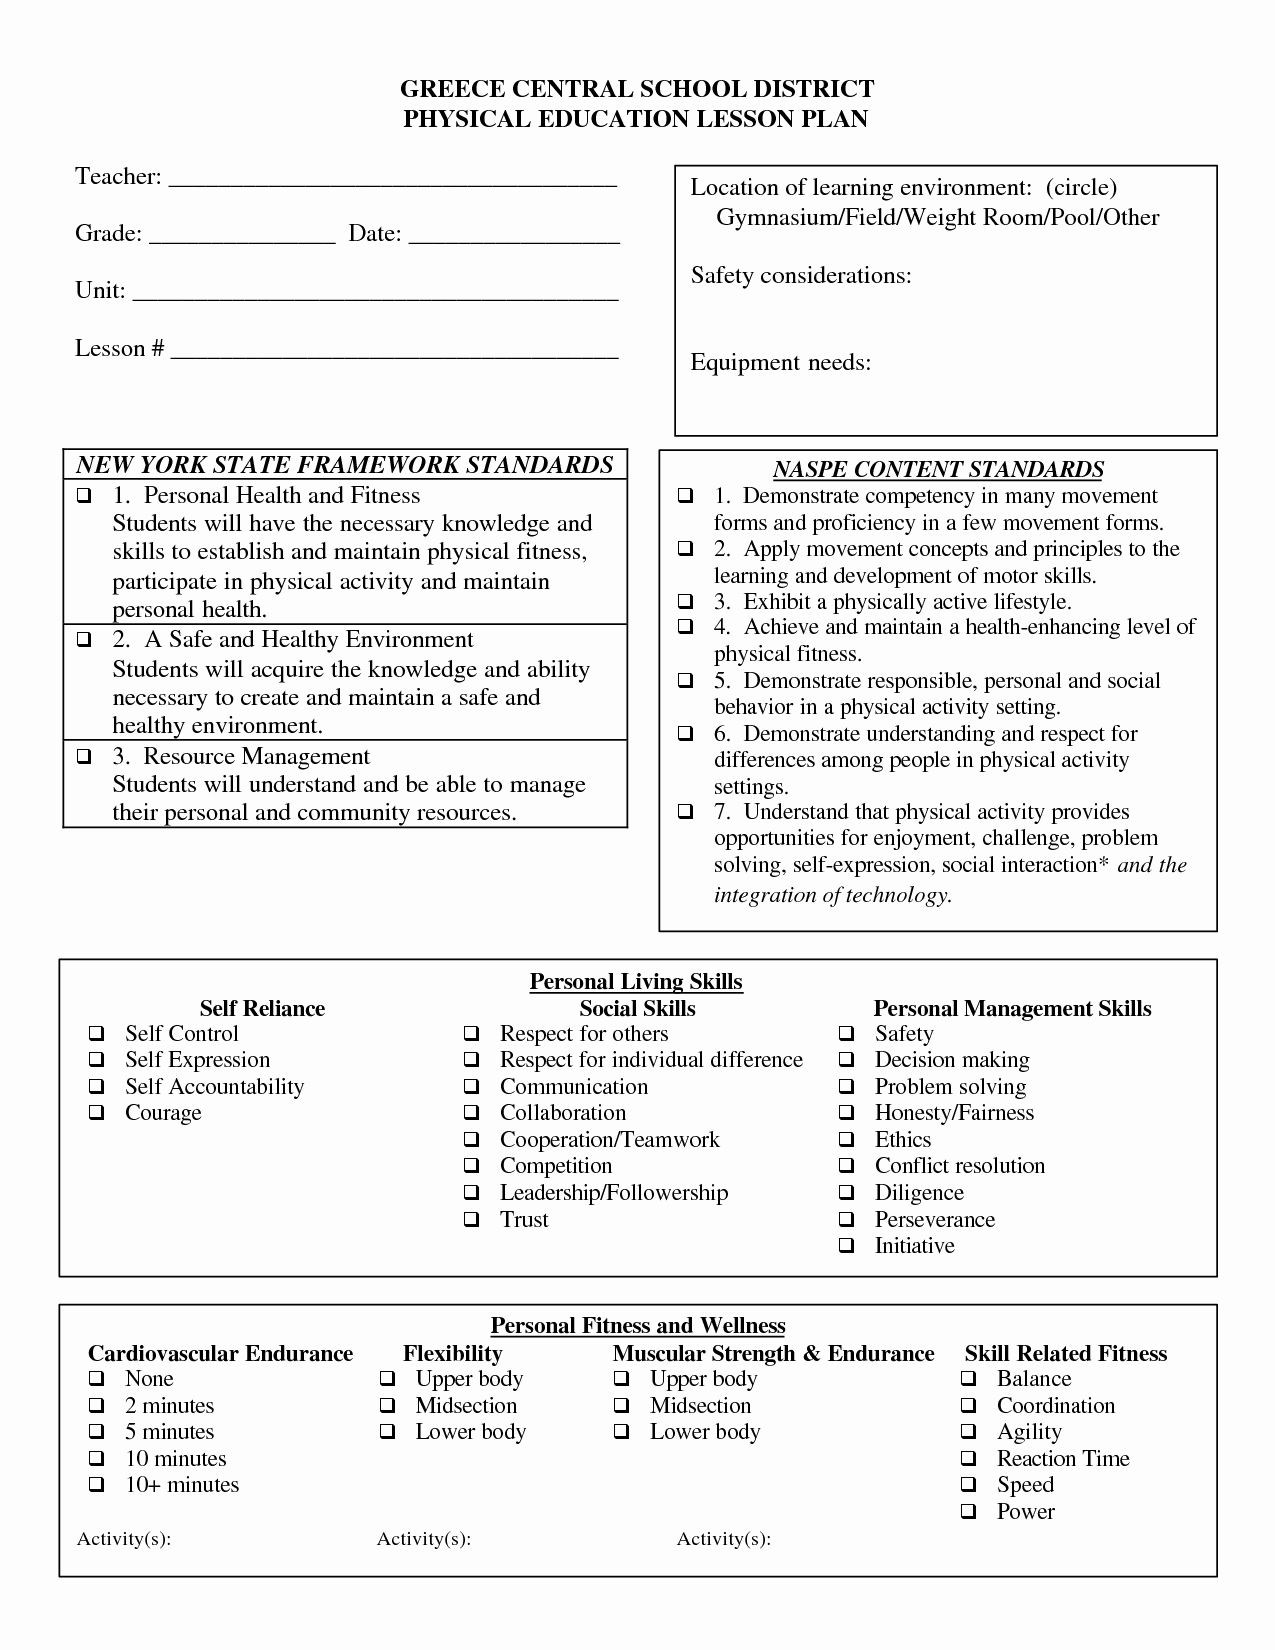 Physical Education Lesson Plans 25 Physical Education Lesson Plan Template In 2020 with